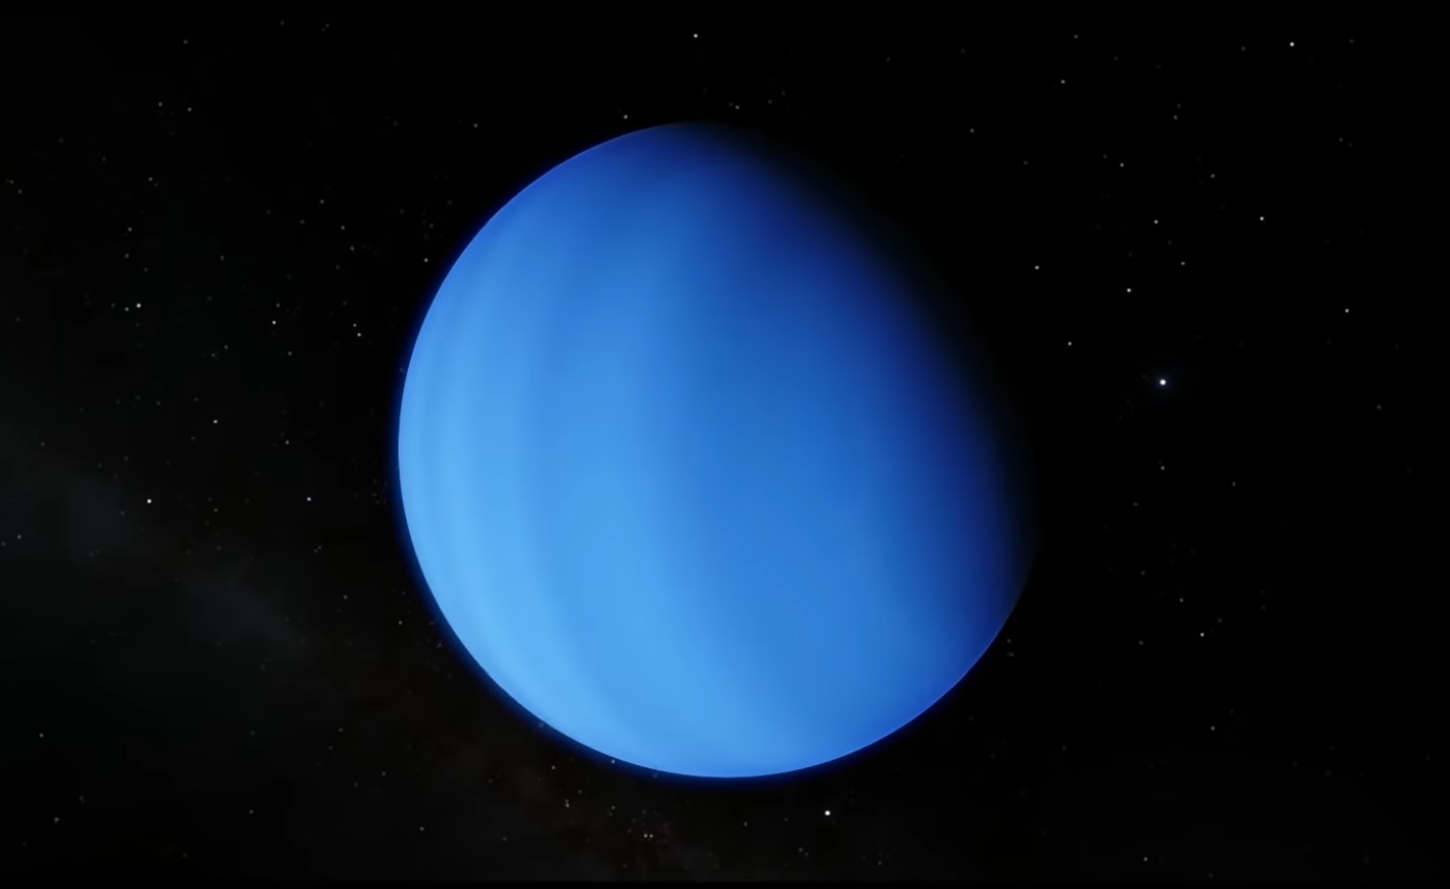 Mysterious Exoplanet HD 106906b